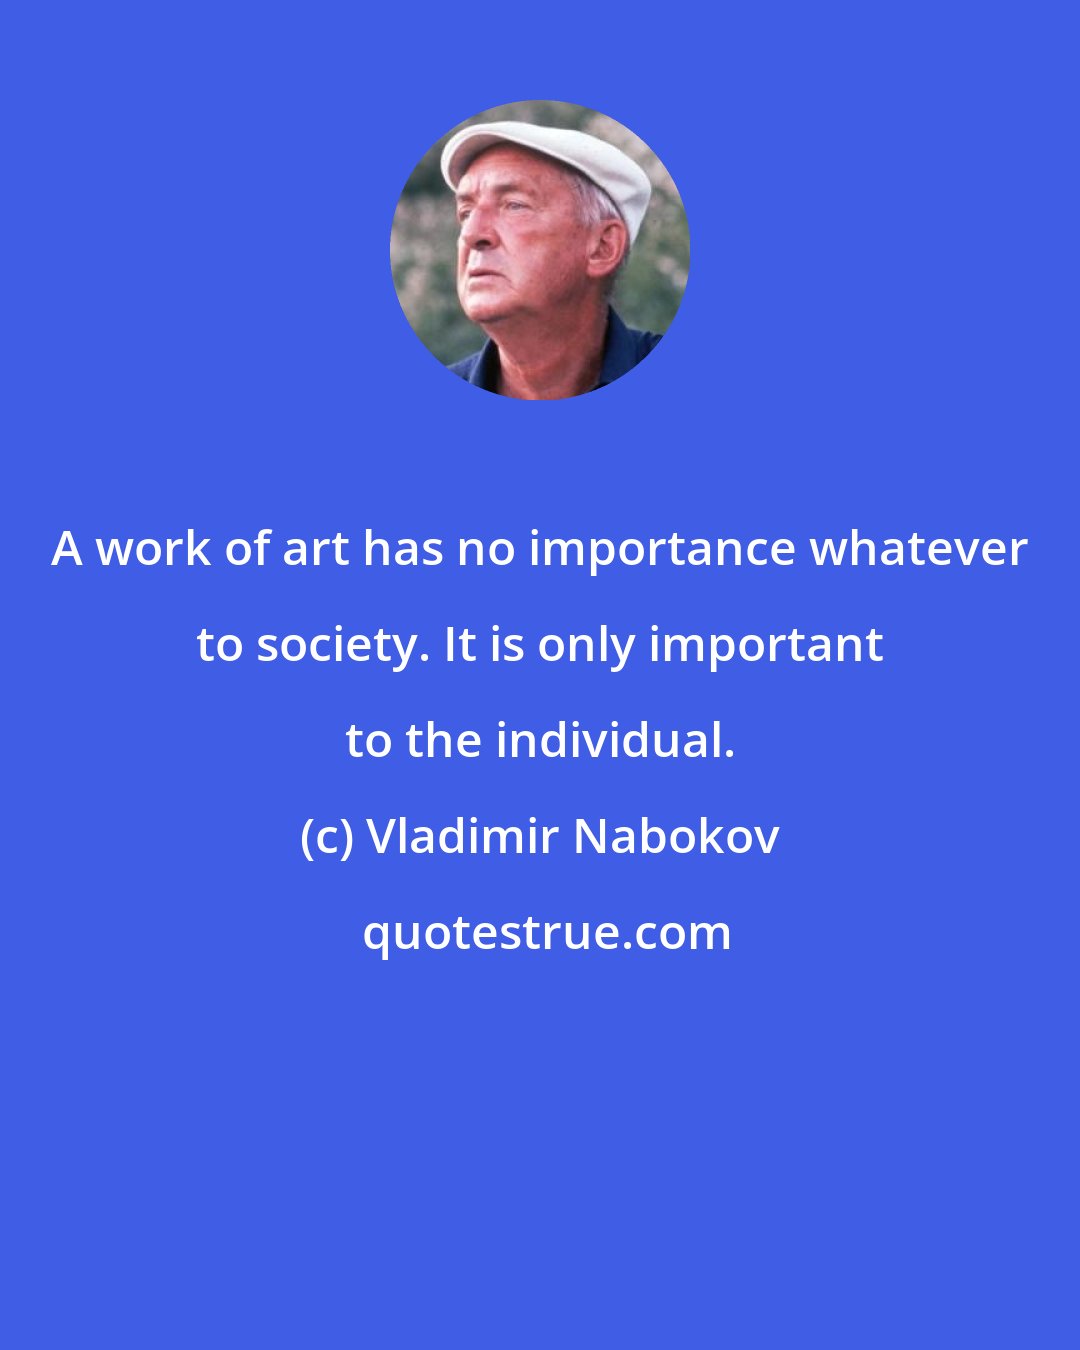 Vladimir Nabokov: A work of art has no importance whatever to society. It is only important to the individual.